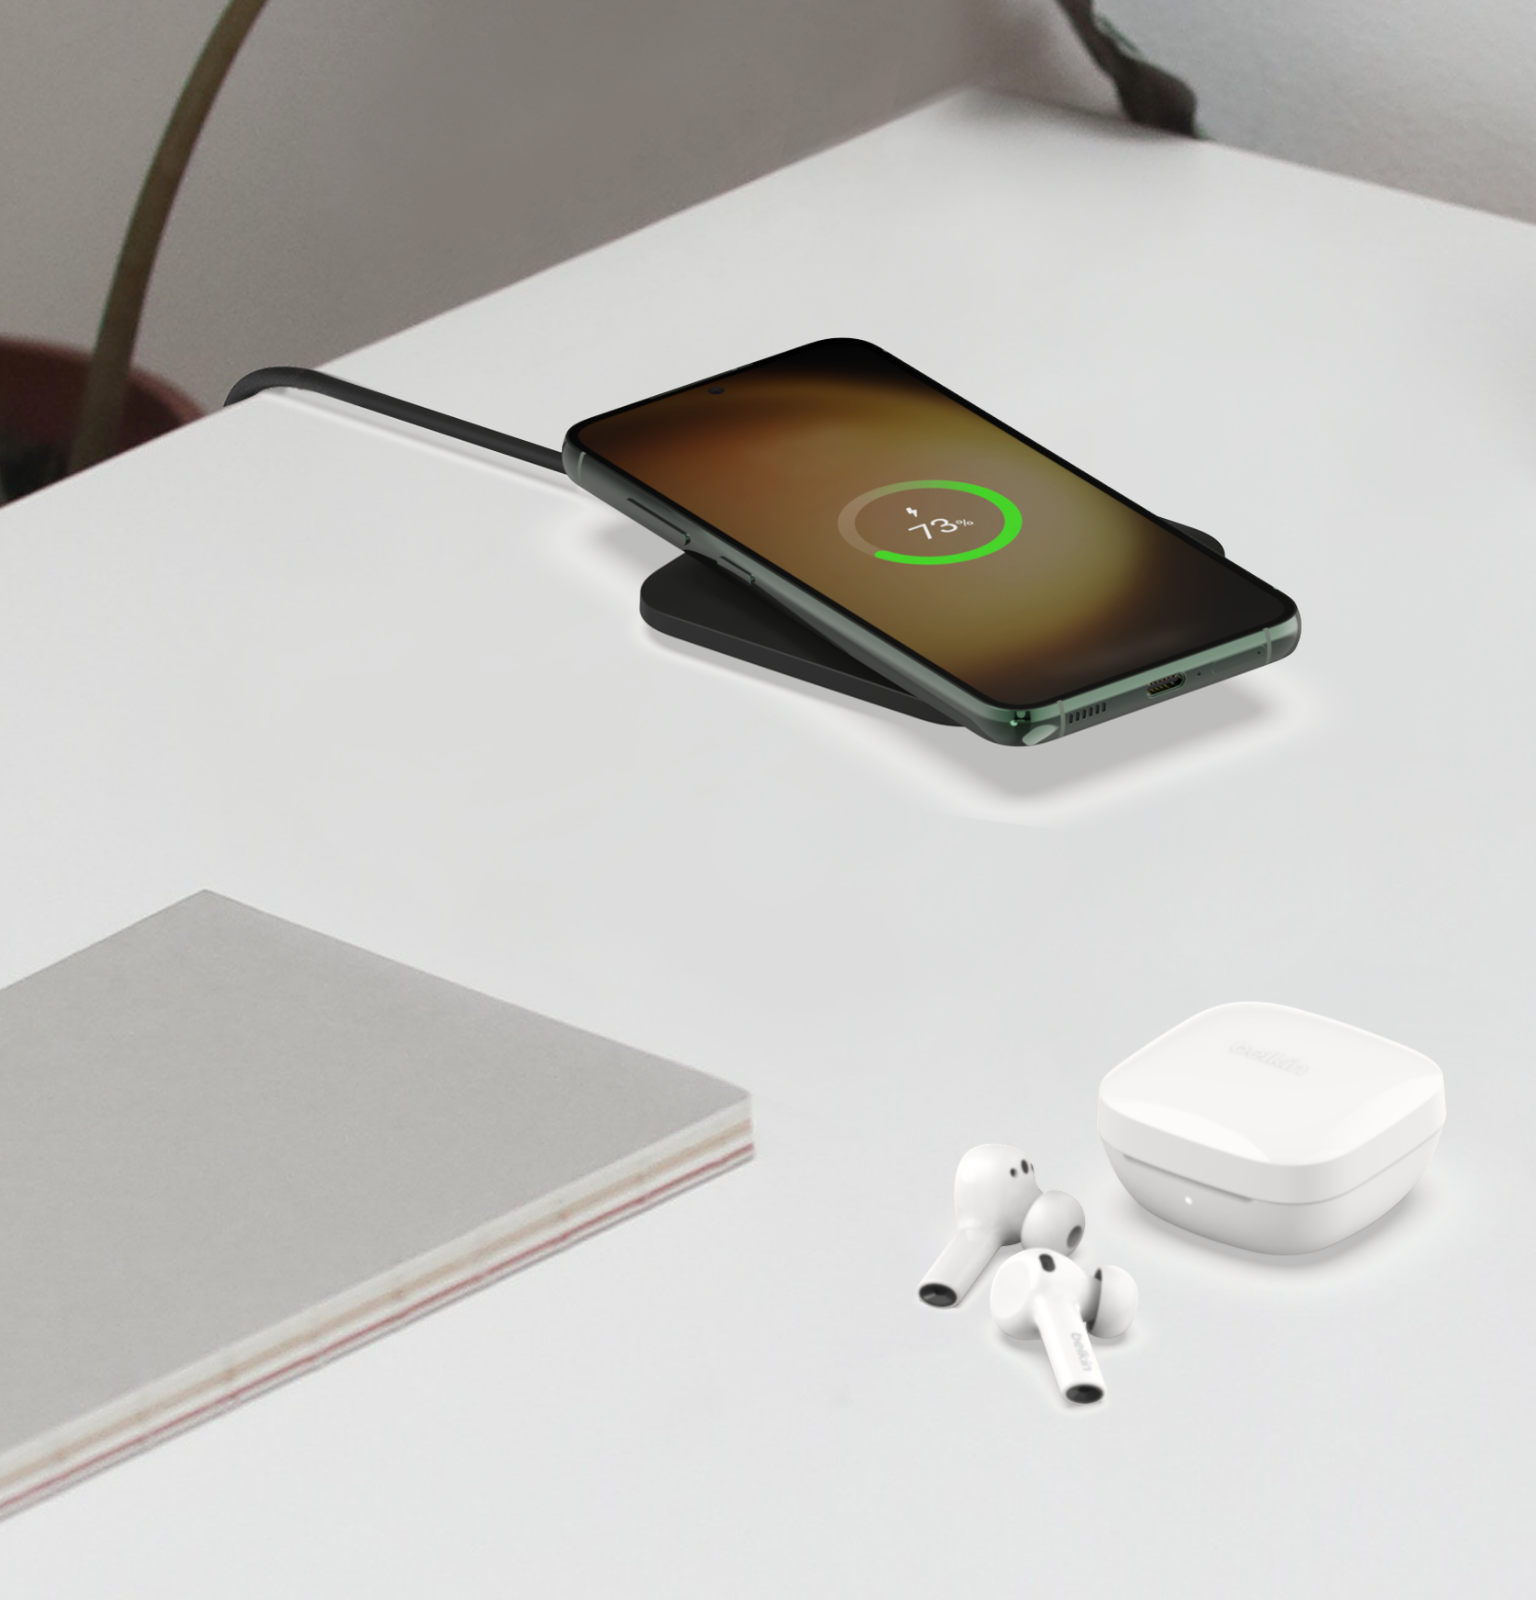 belkin-wia007-bk-15w-easy-alignment-wireless-charging-pad -dot-com-assets-2-v01-r01-mobile-768x800-us.png